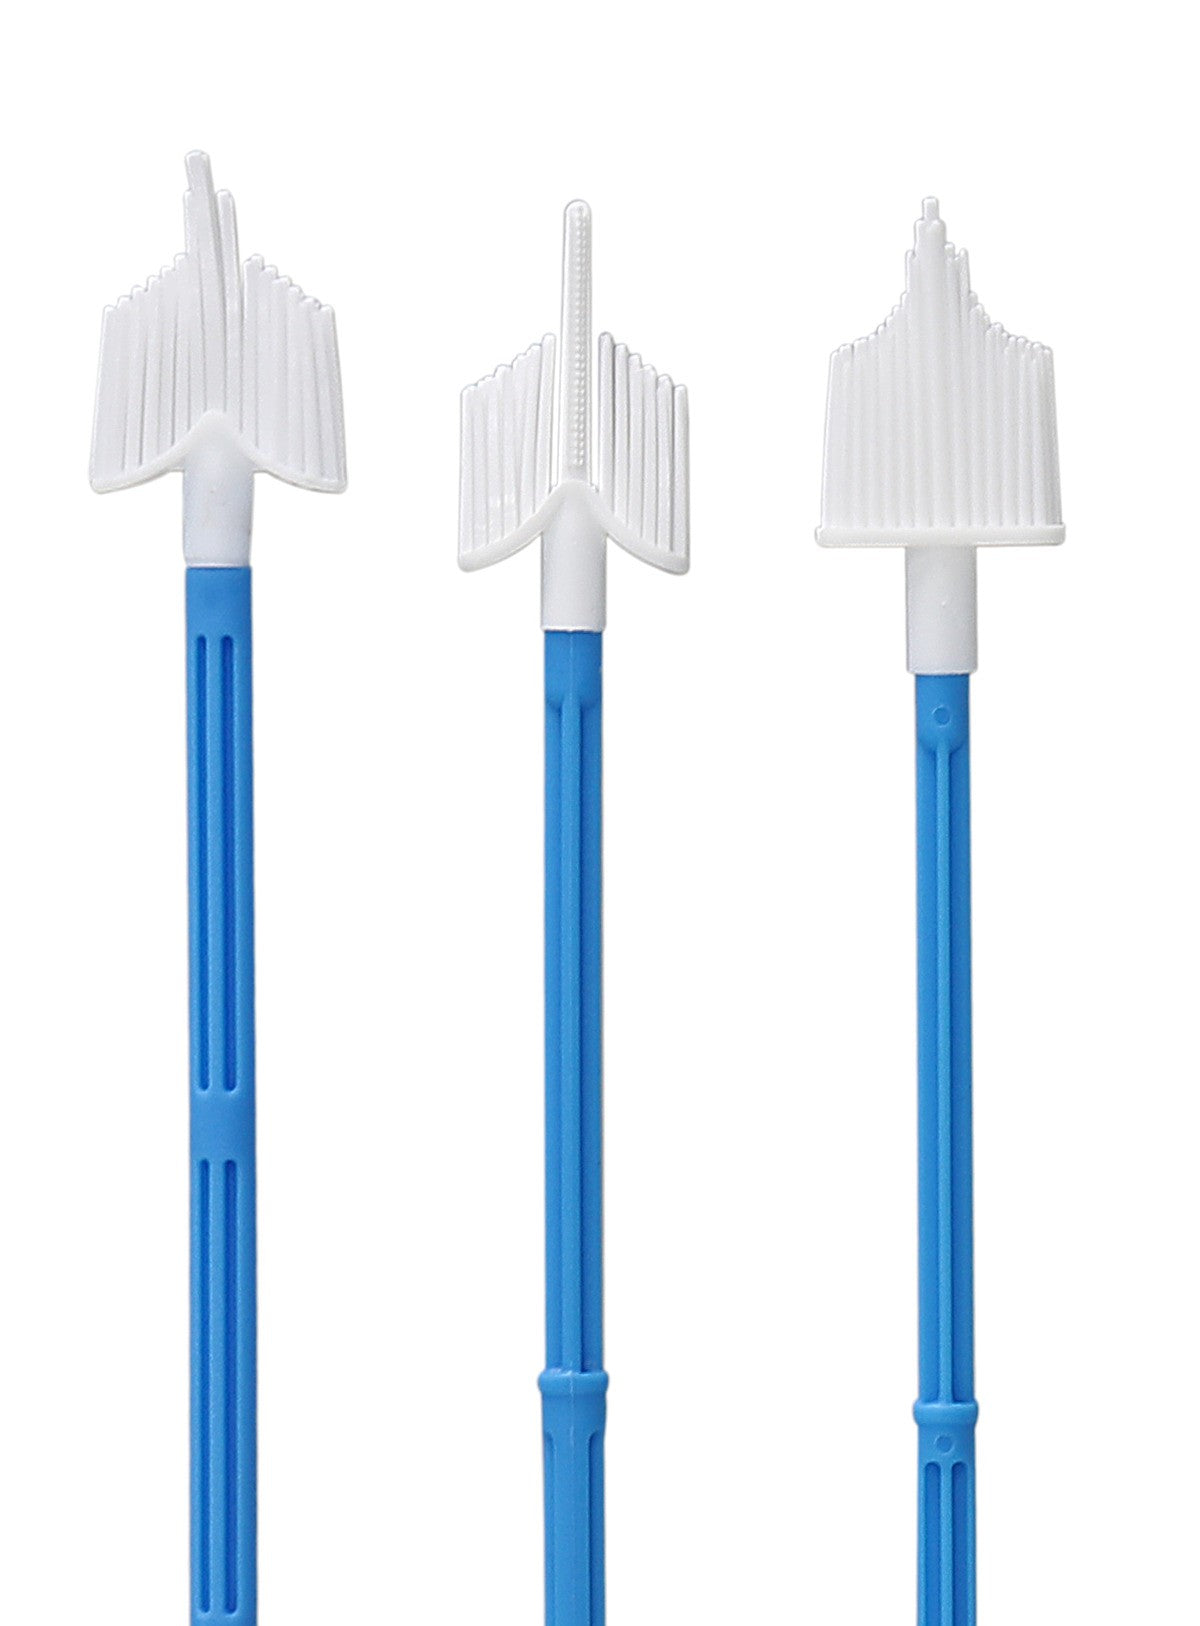 Cervical Brush, Disposable, With Removable Tip, for Cell Collection from Endocervical, Molded Handle in Blue Color, Overall Length 200 mm. Individual Pack, E.O Sterile - 100 pieces